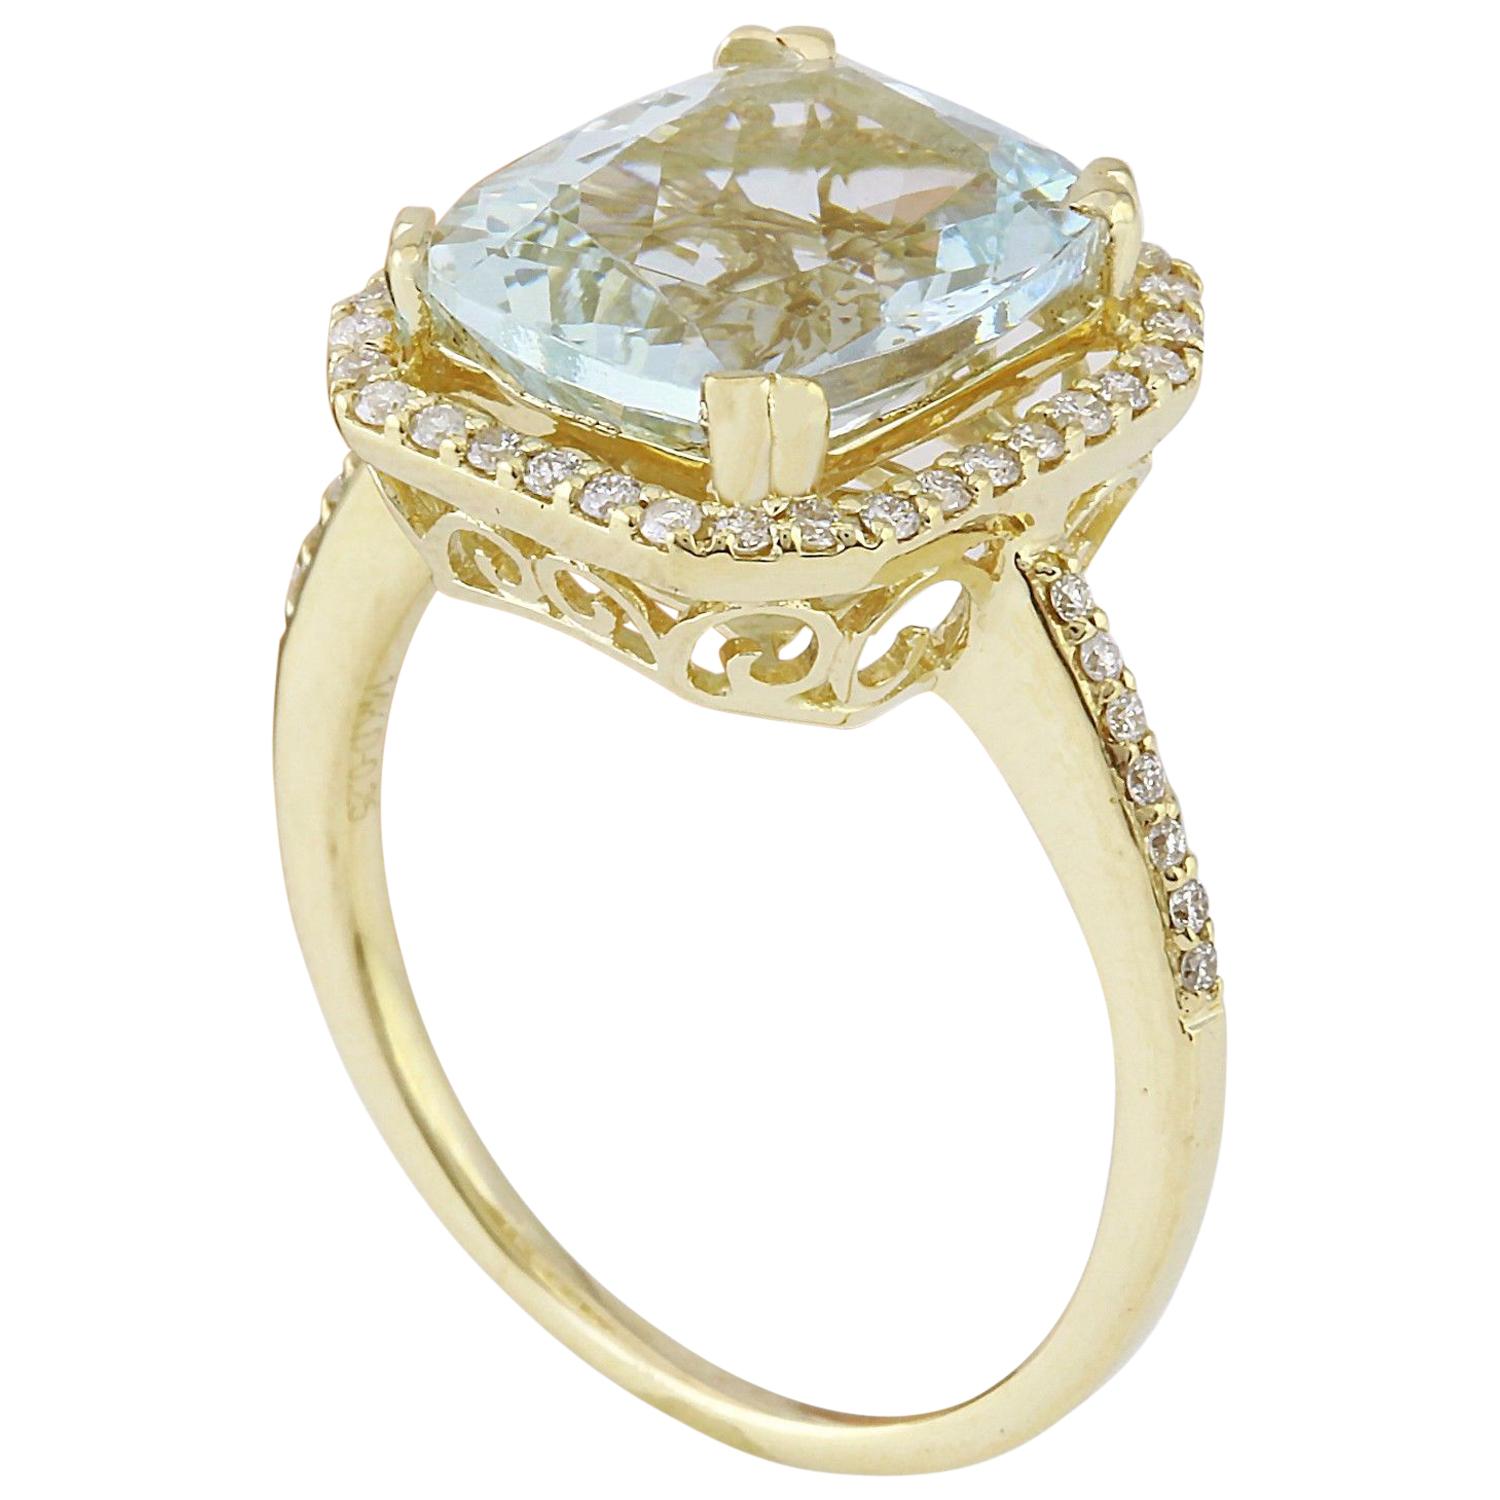 3.55 Carat Natural Aquamarine 14 Karat Solid Yellow Gold Diamond Ring In New Condition For Sale In Los Angeles, CA